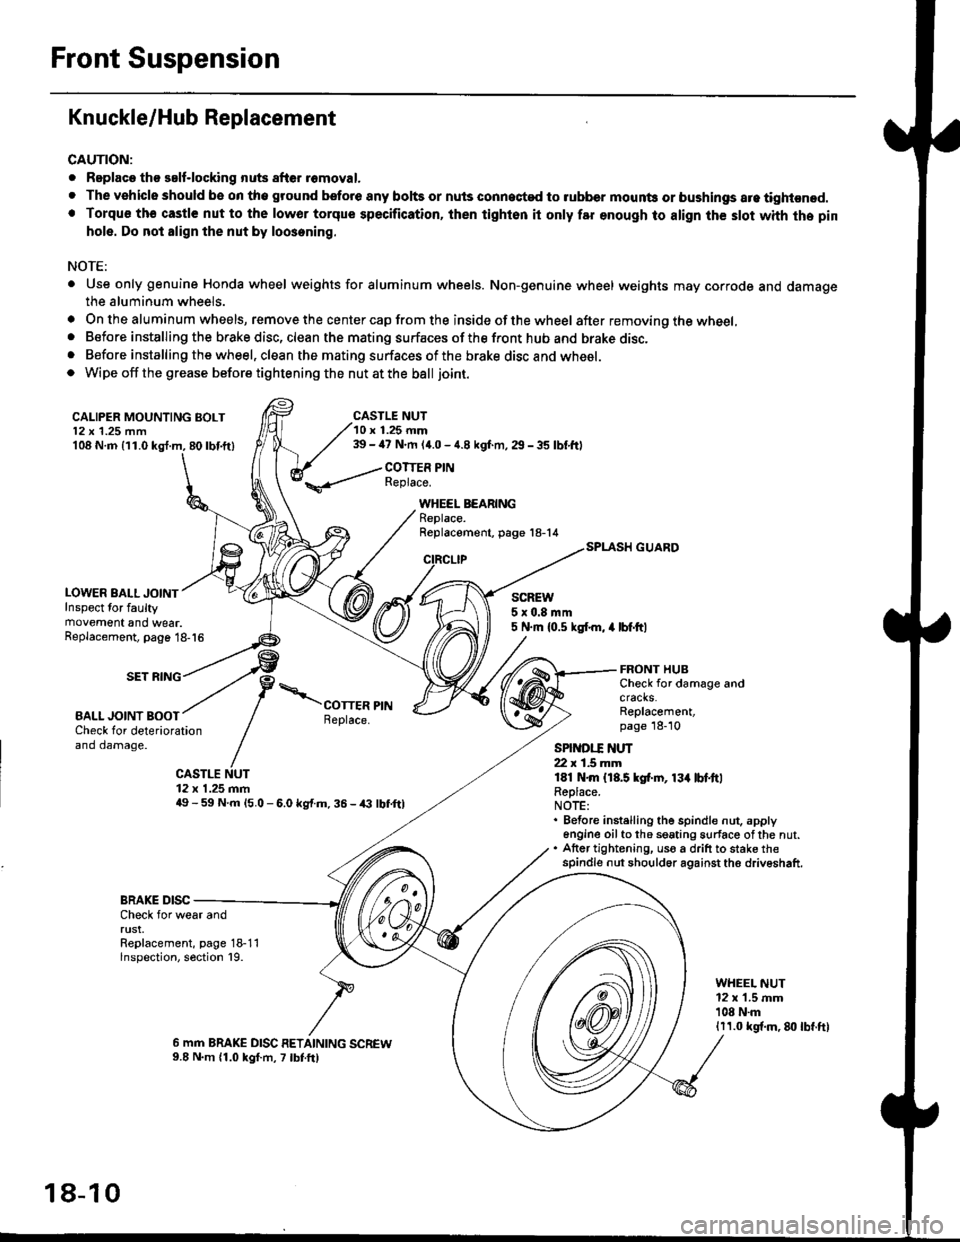 HONDA CIVIC 1998 6.G Workshop Manual Front Suspension
Knuckle/Hub Replacement
CAUTION:
. Replaco tho salf-locking nuts after romoval.
. The vehiclo should be on tho ground bsfore any bohs or nuls connected to rubber mounb or bushings are